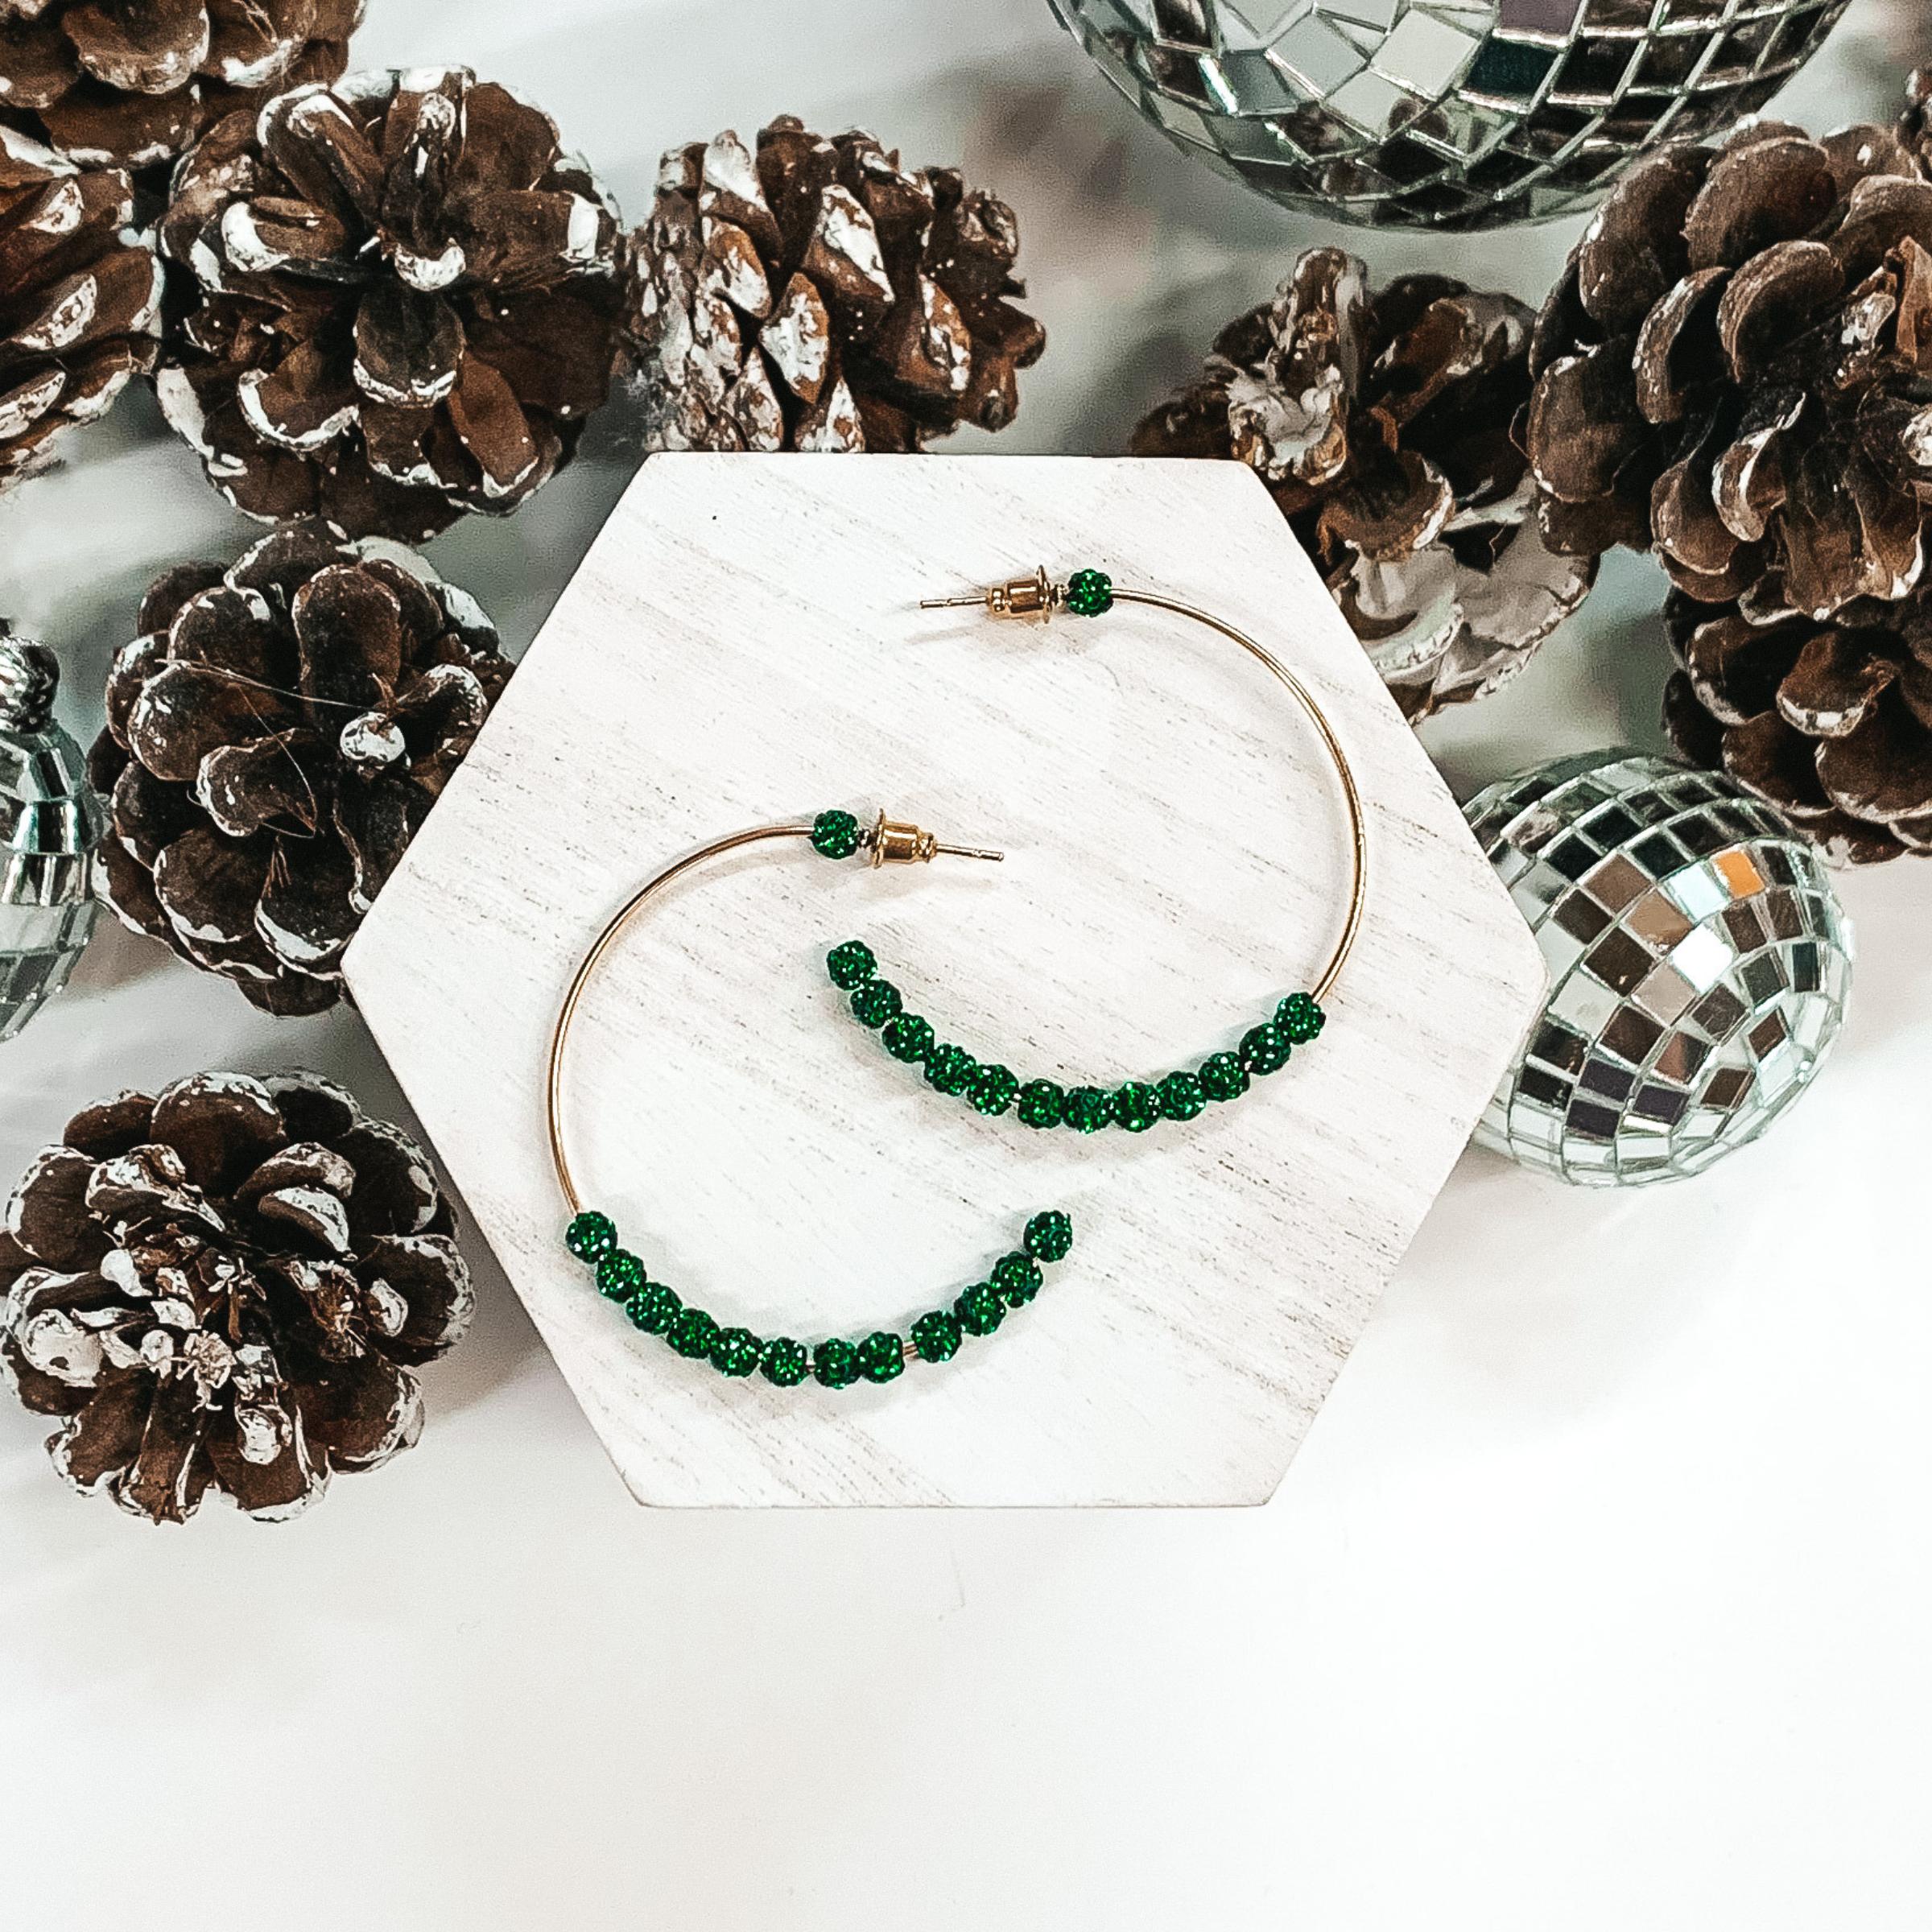 Merry and Bright Hoop Earrings in Sparkly Green - Giddy Up Glamour Boutique